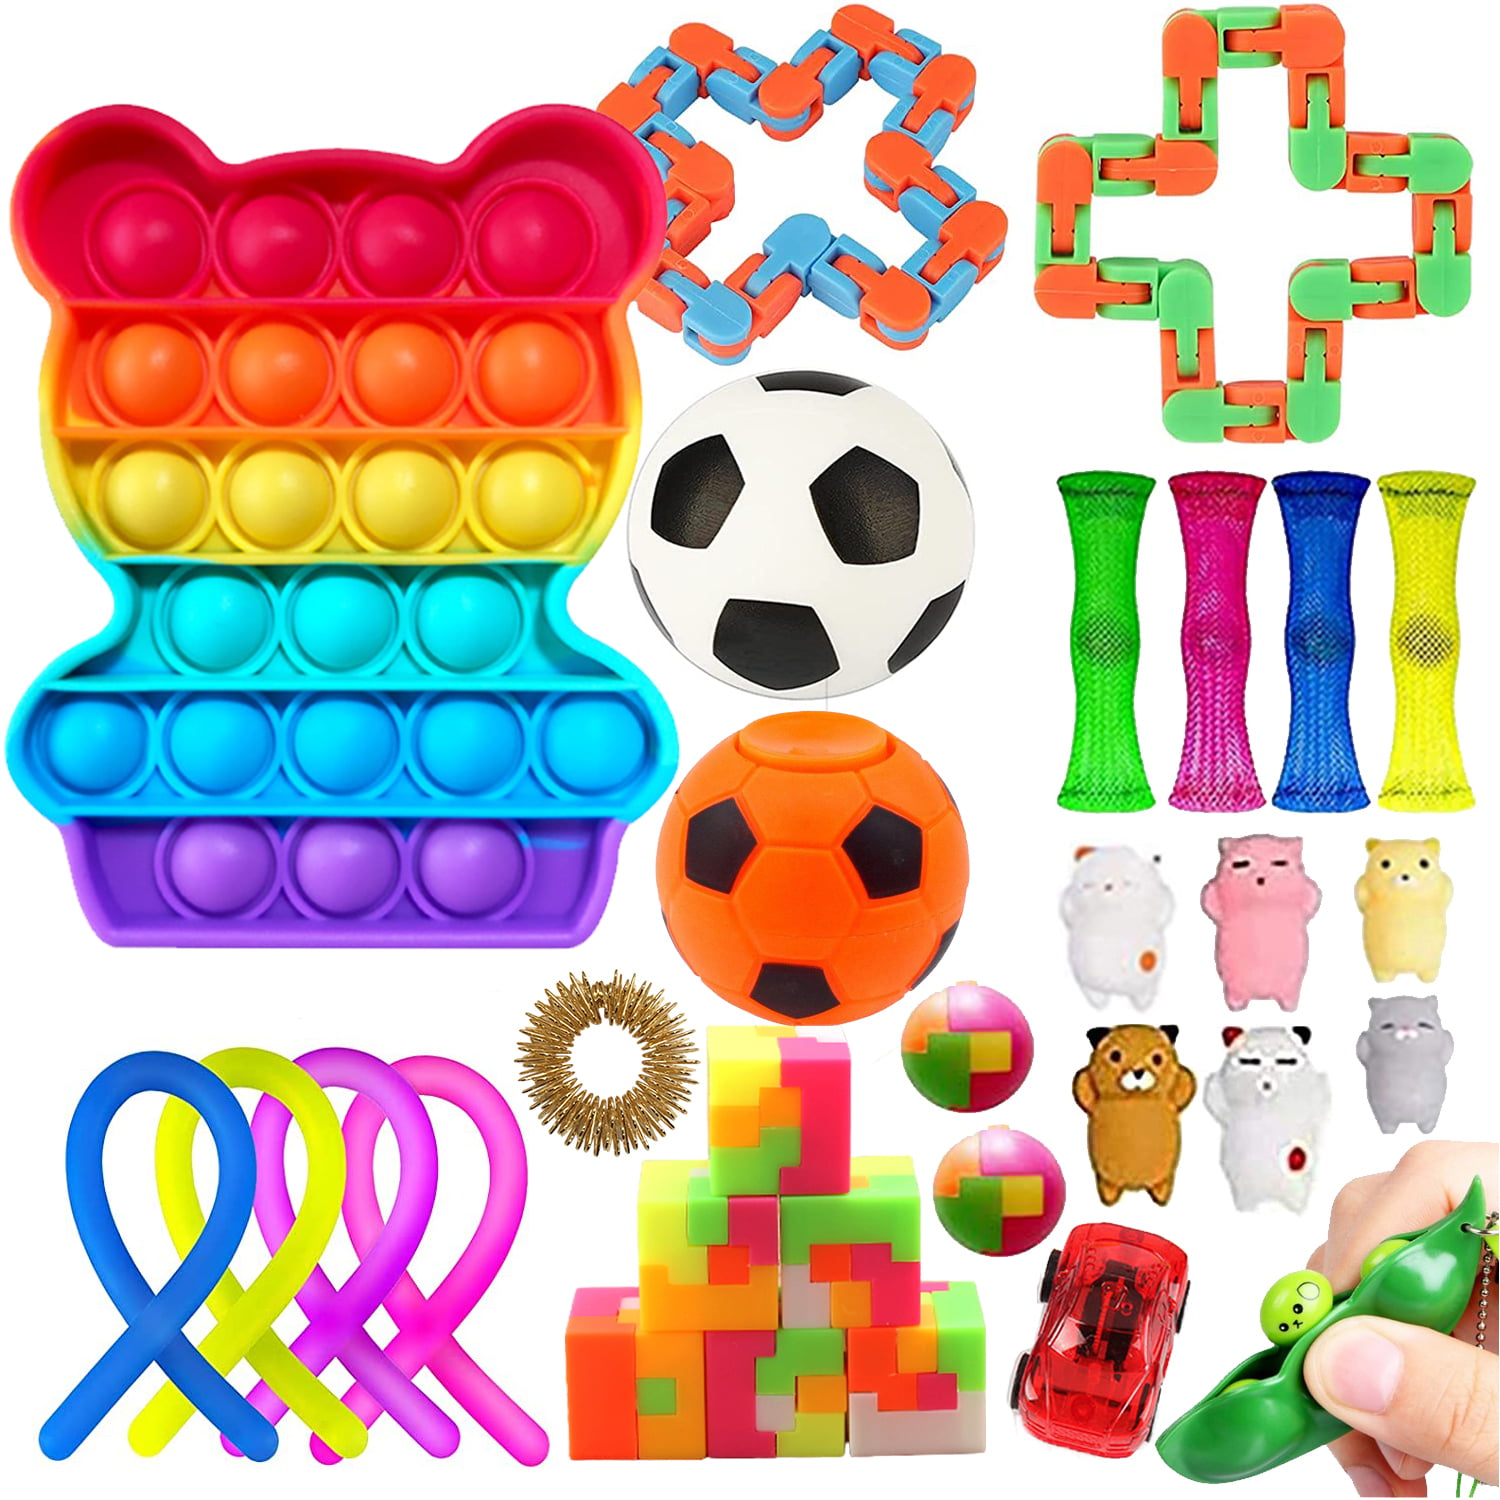 Details about   Bubble Fidget Toy Rainbow Simple Dimple Sensory Kids ADHD Stress Relief Hand Toy 